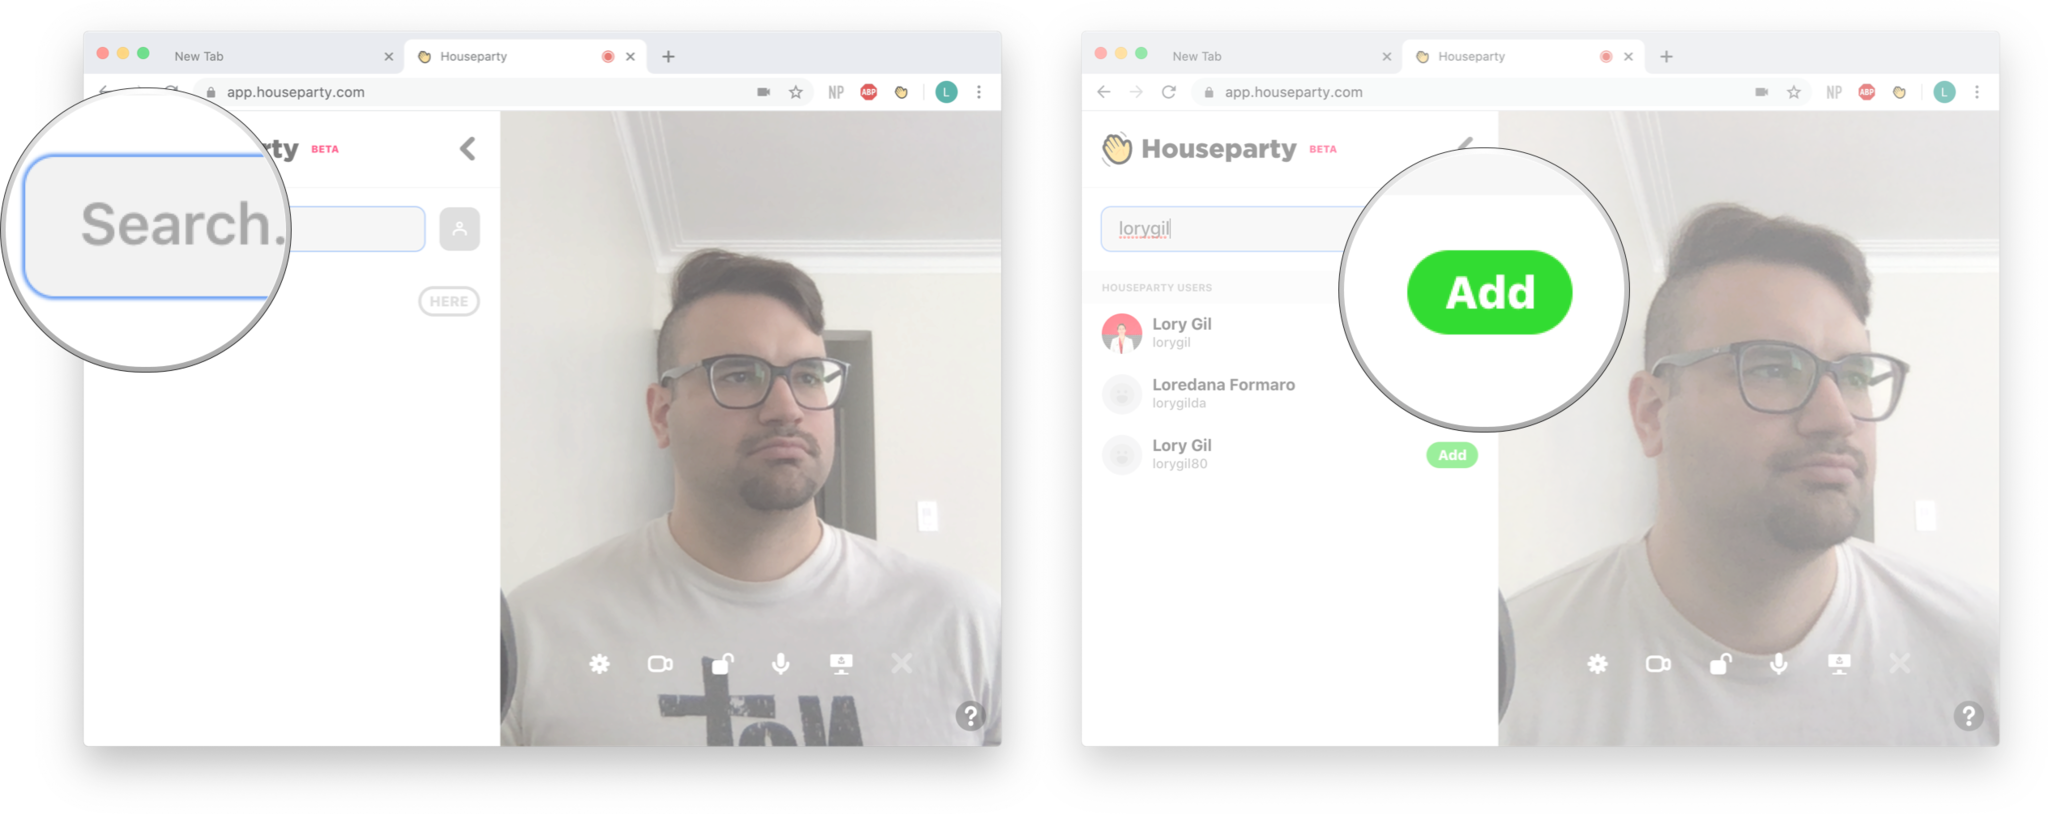 Adding Friends In Houseparty On Google Chrome: Tye the username of your friend in the search bar and click add.